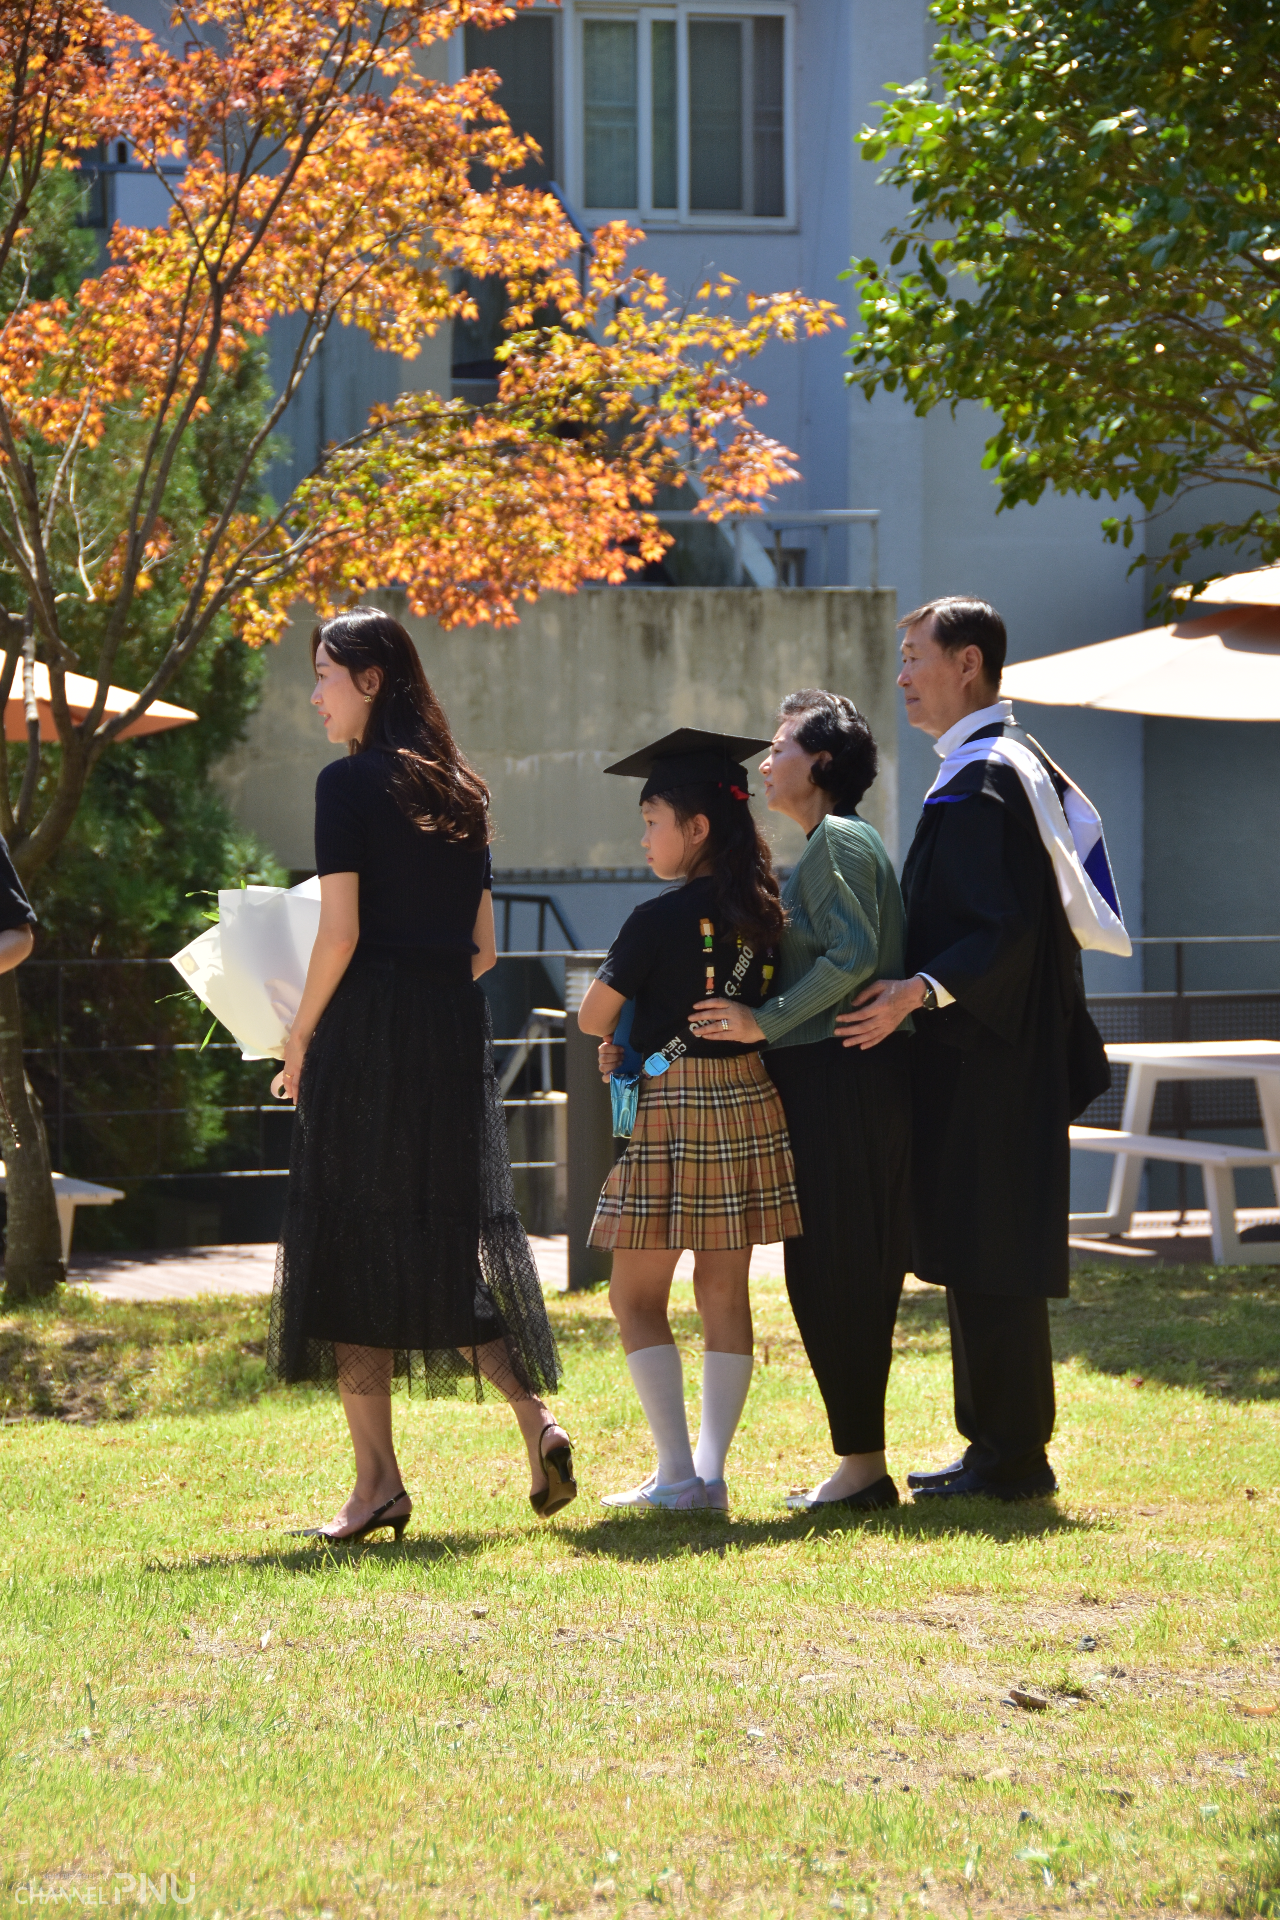 A family is taking the picture. The graduate is the woman leftmost. But her daughter grabs the mortarboard and diploma, and her father wears the graduation gown. [Jun Hyung-Seo, Reporter]